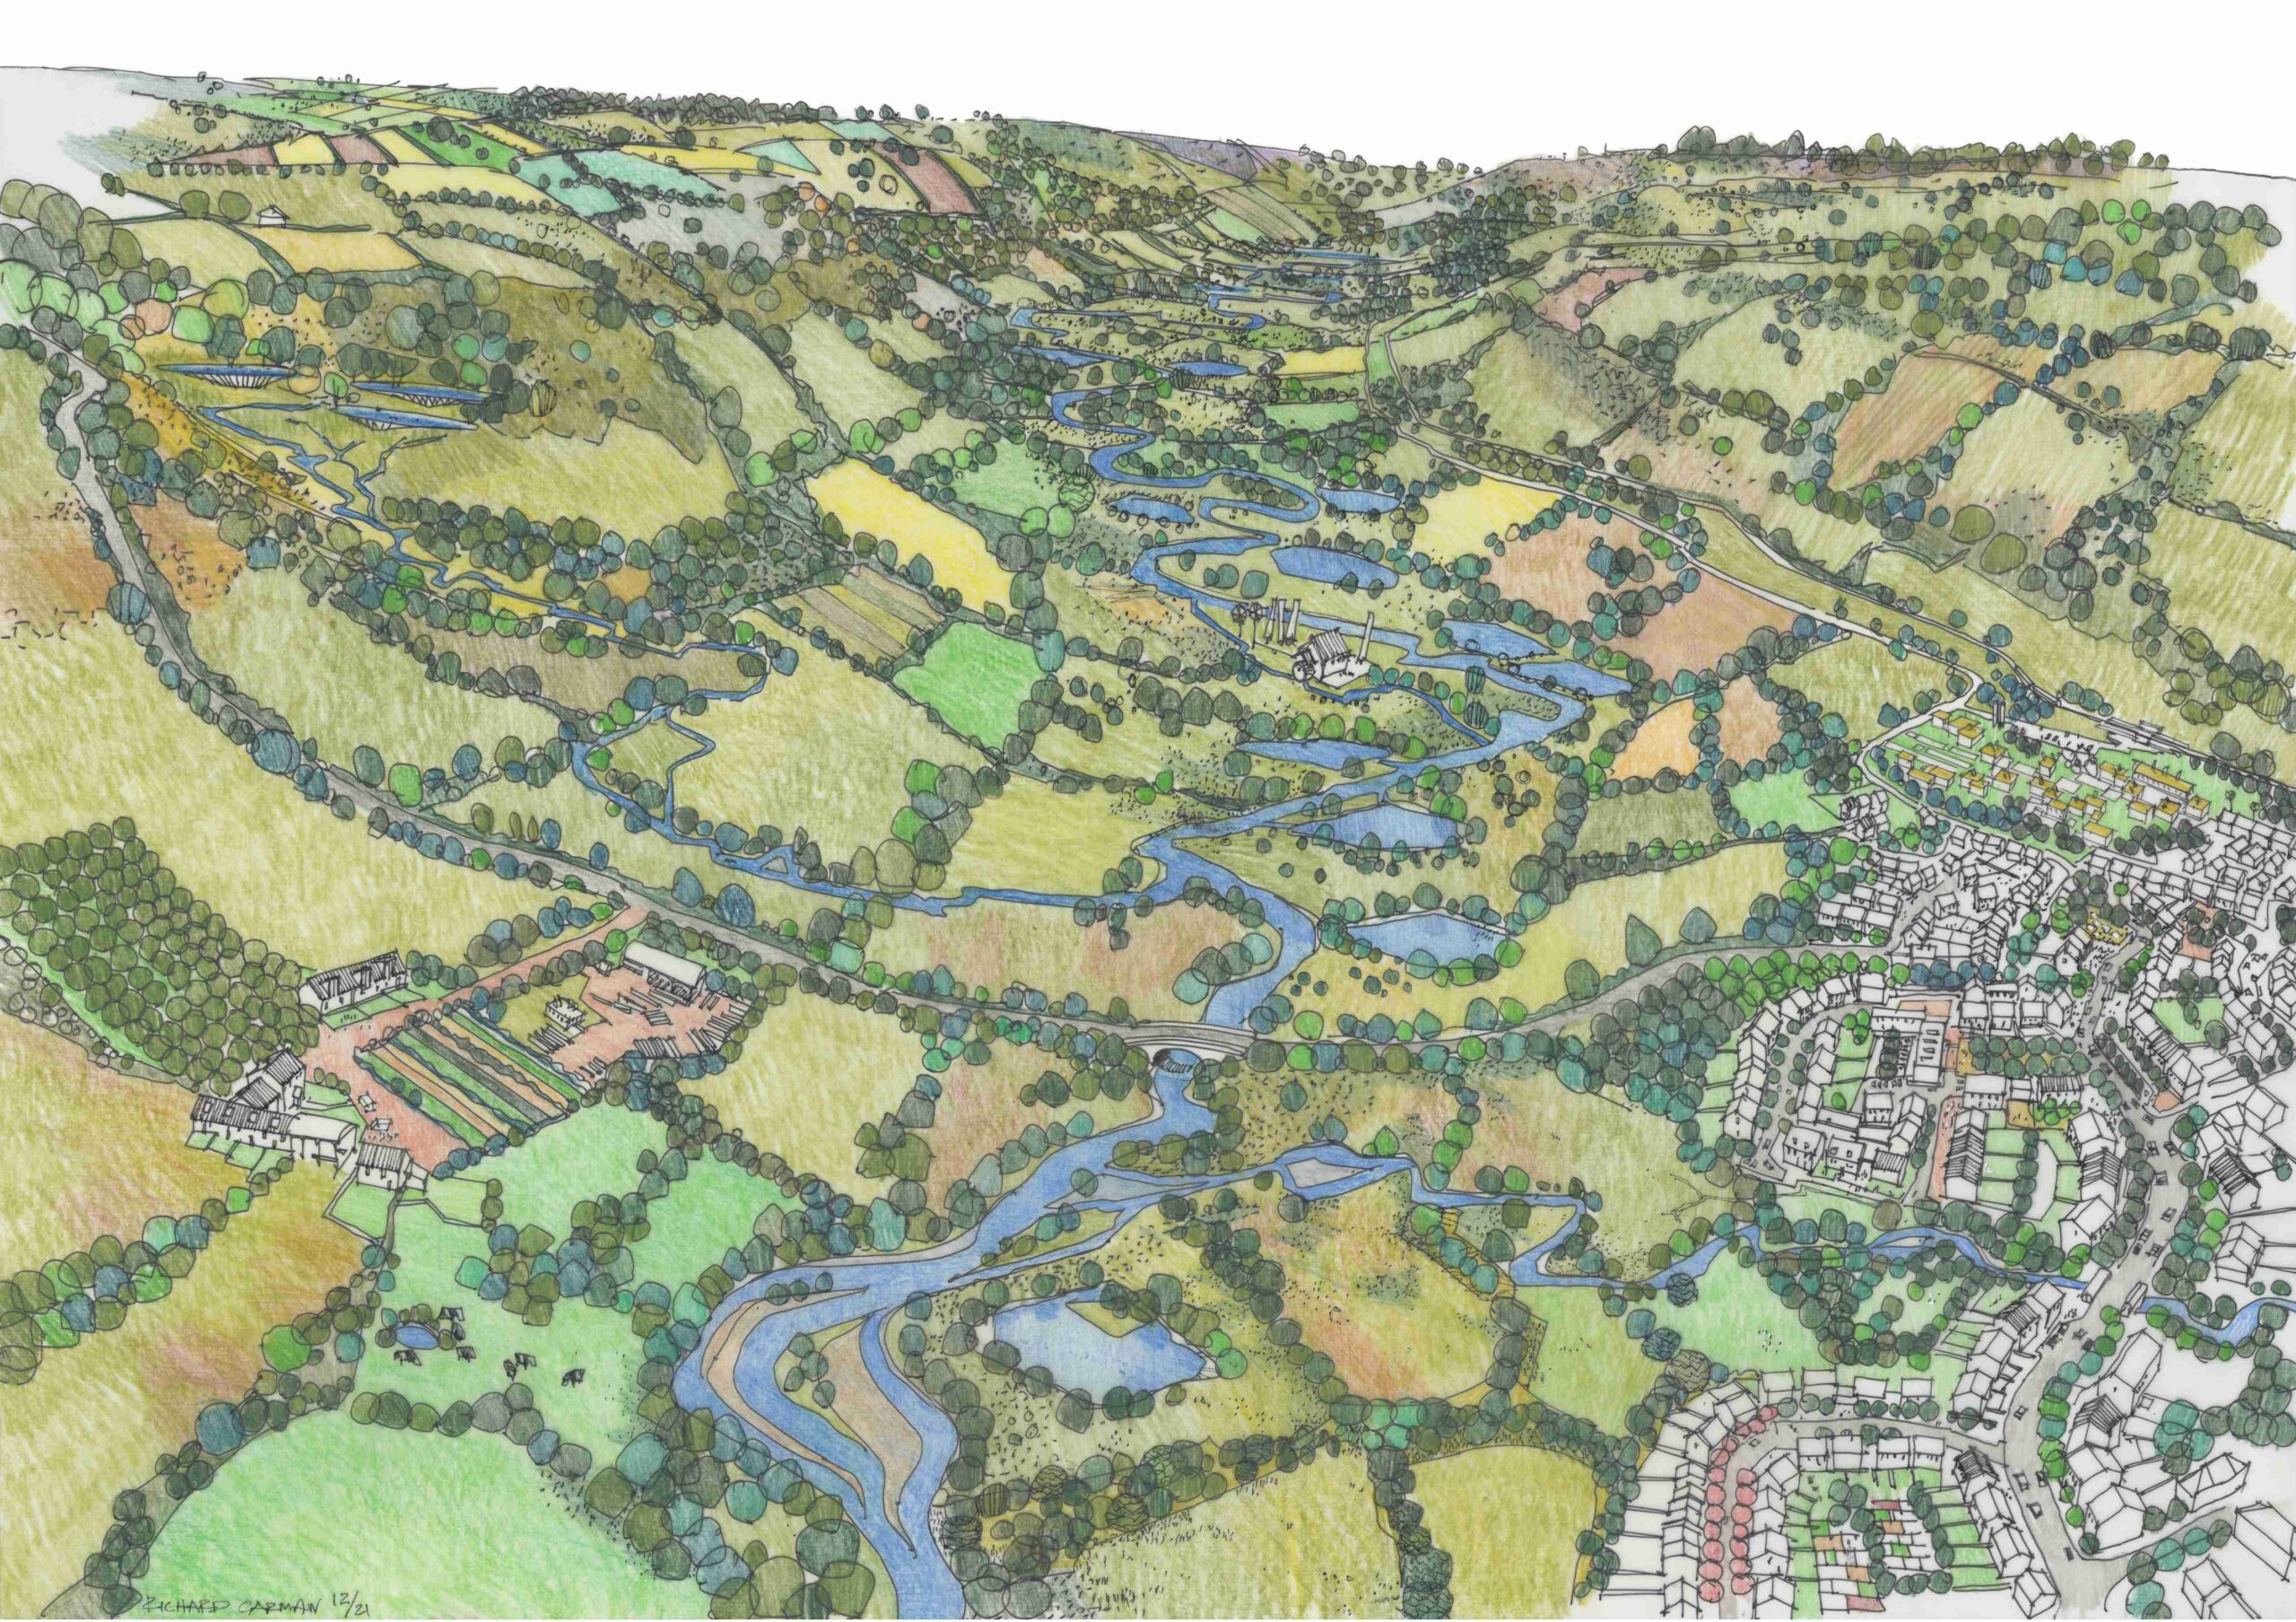 Illustration by Richard Carman of the upper River Culm catchment